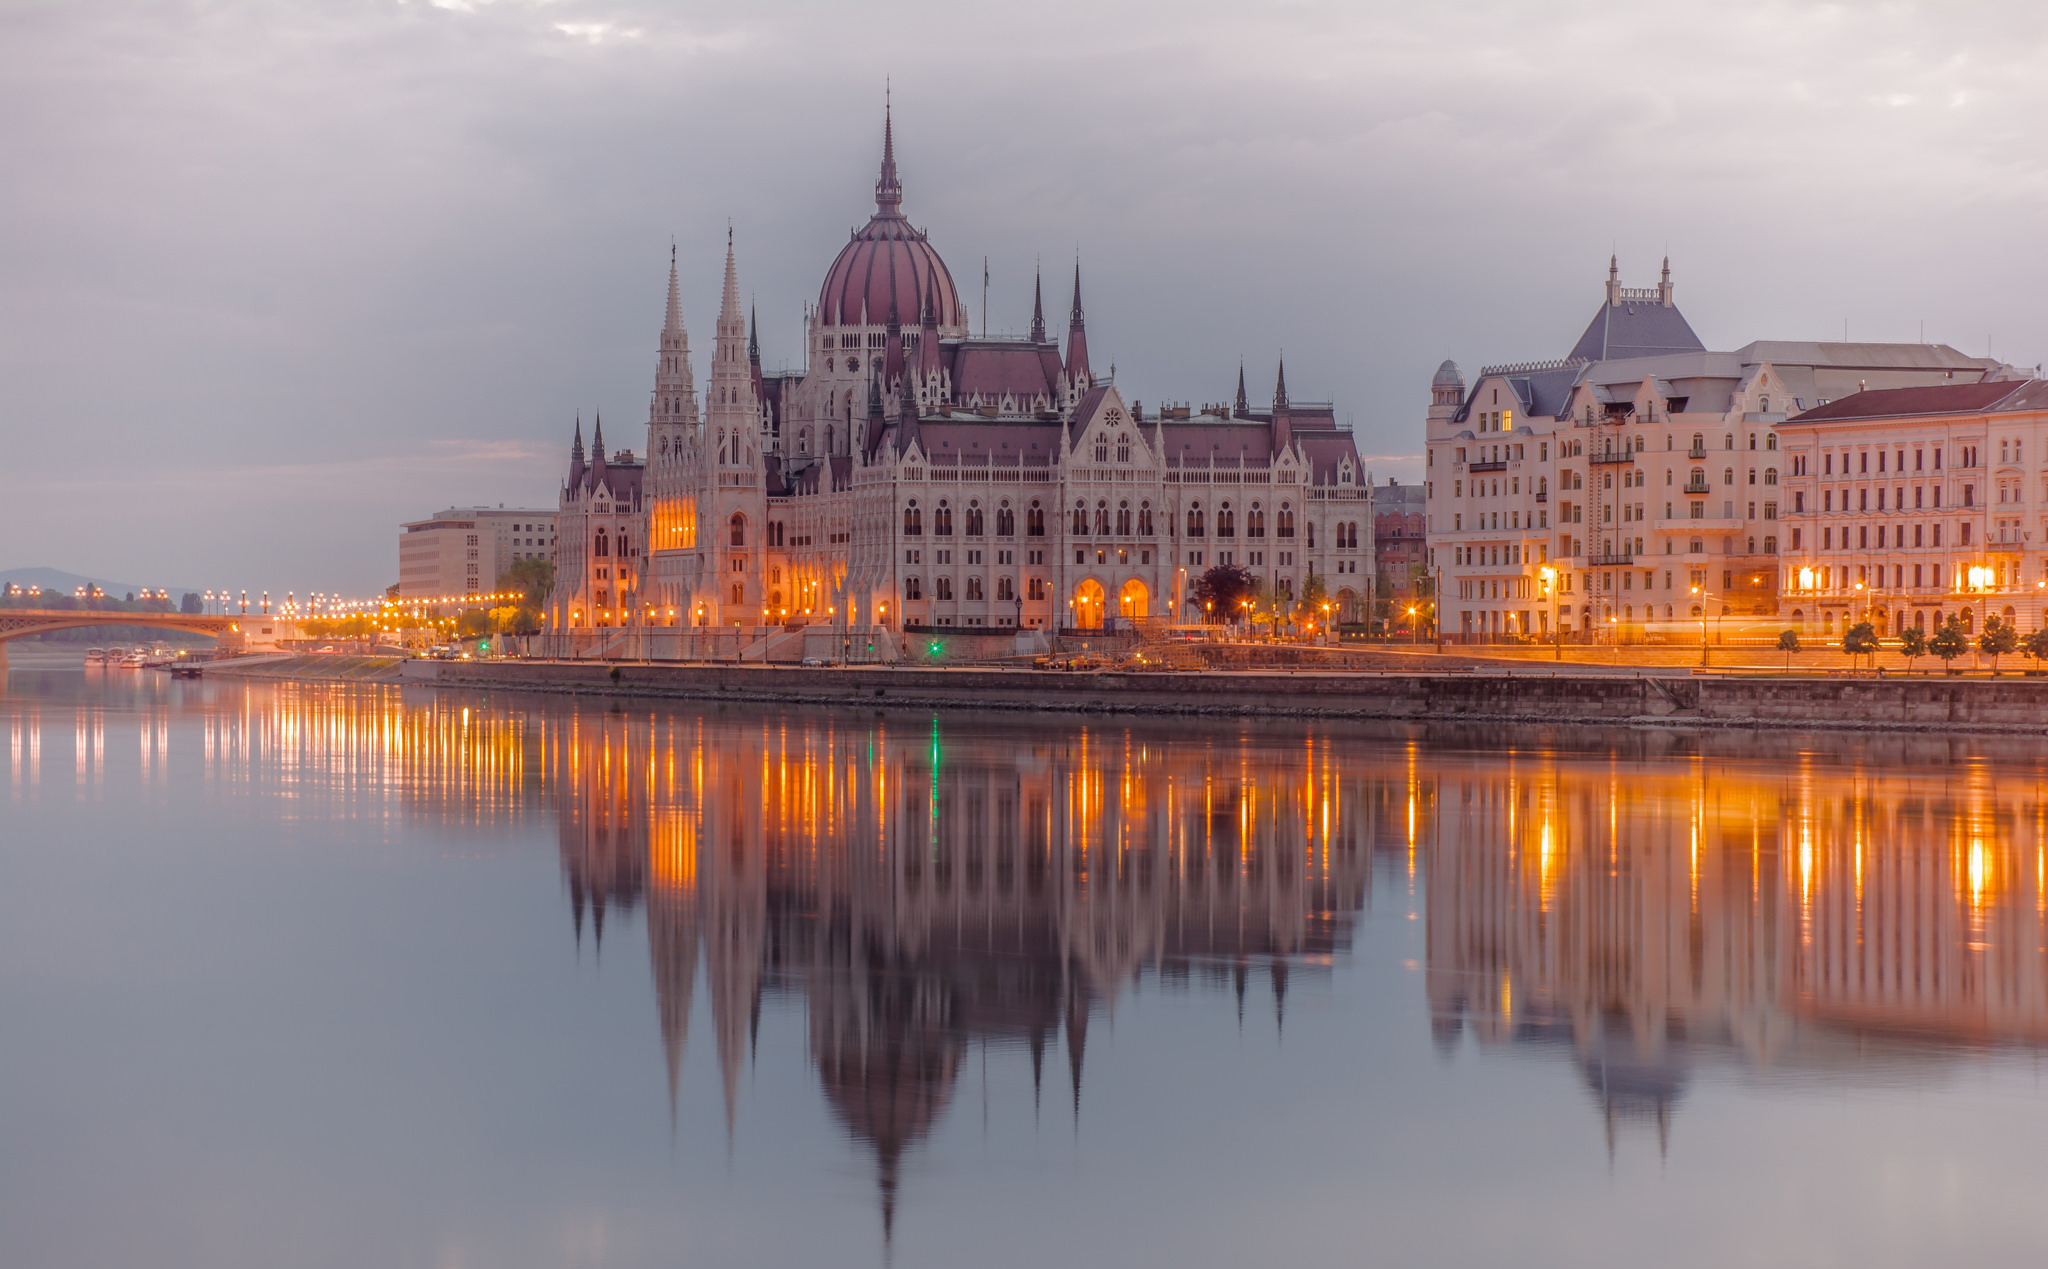 Architecture Budapest Building Danube Hungarian Parliament Building Hungary Monument Reflection Rive 2048x1269